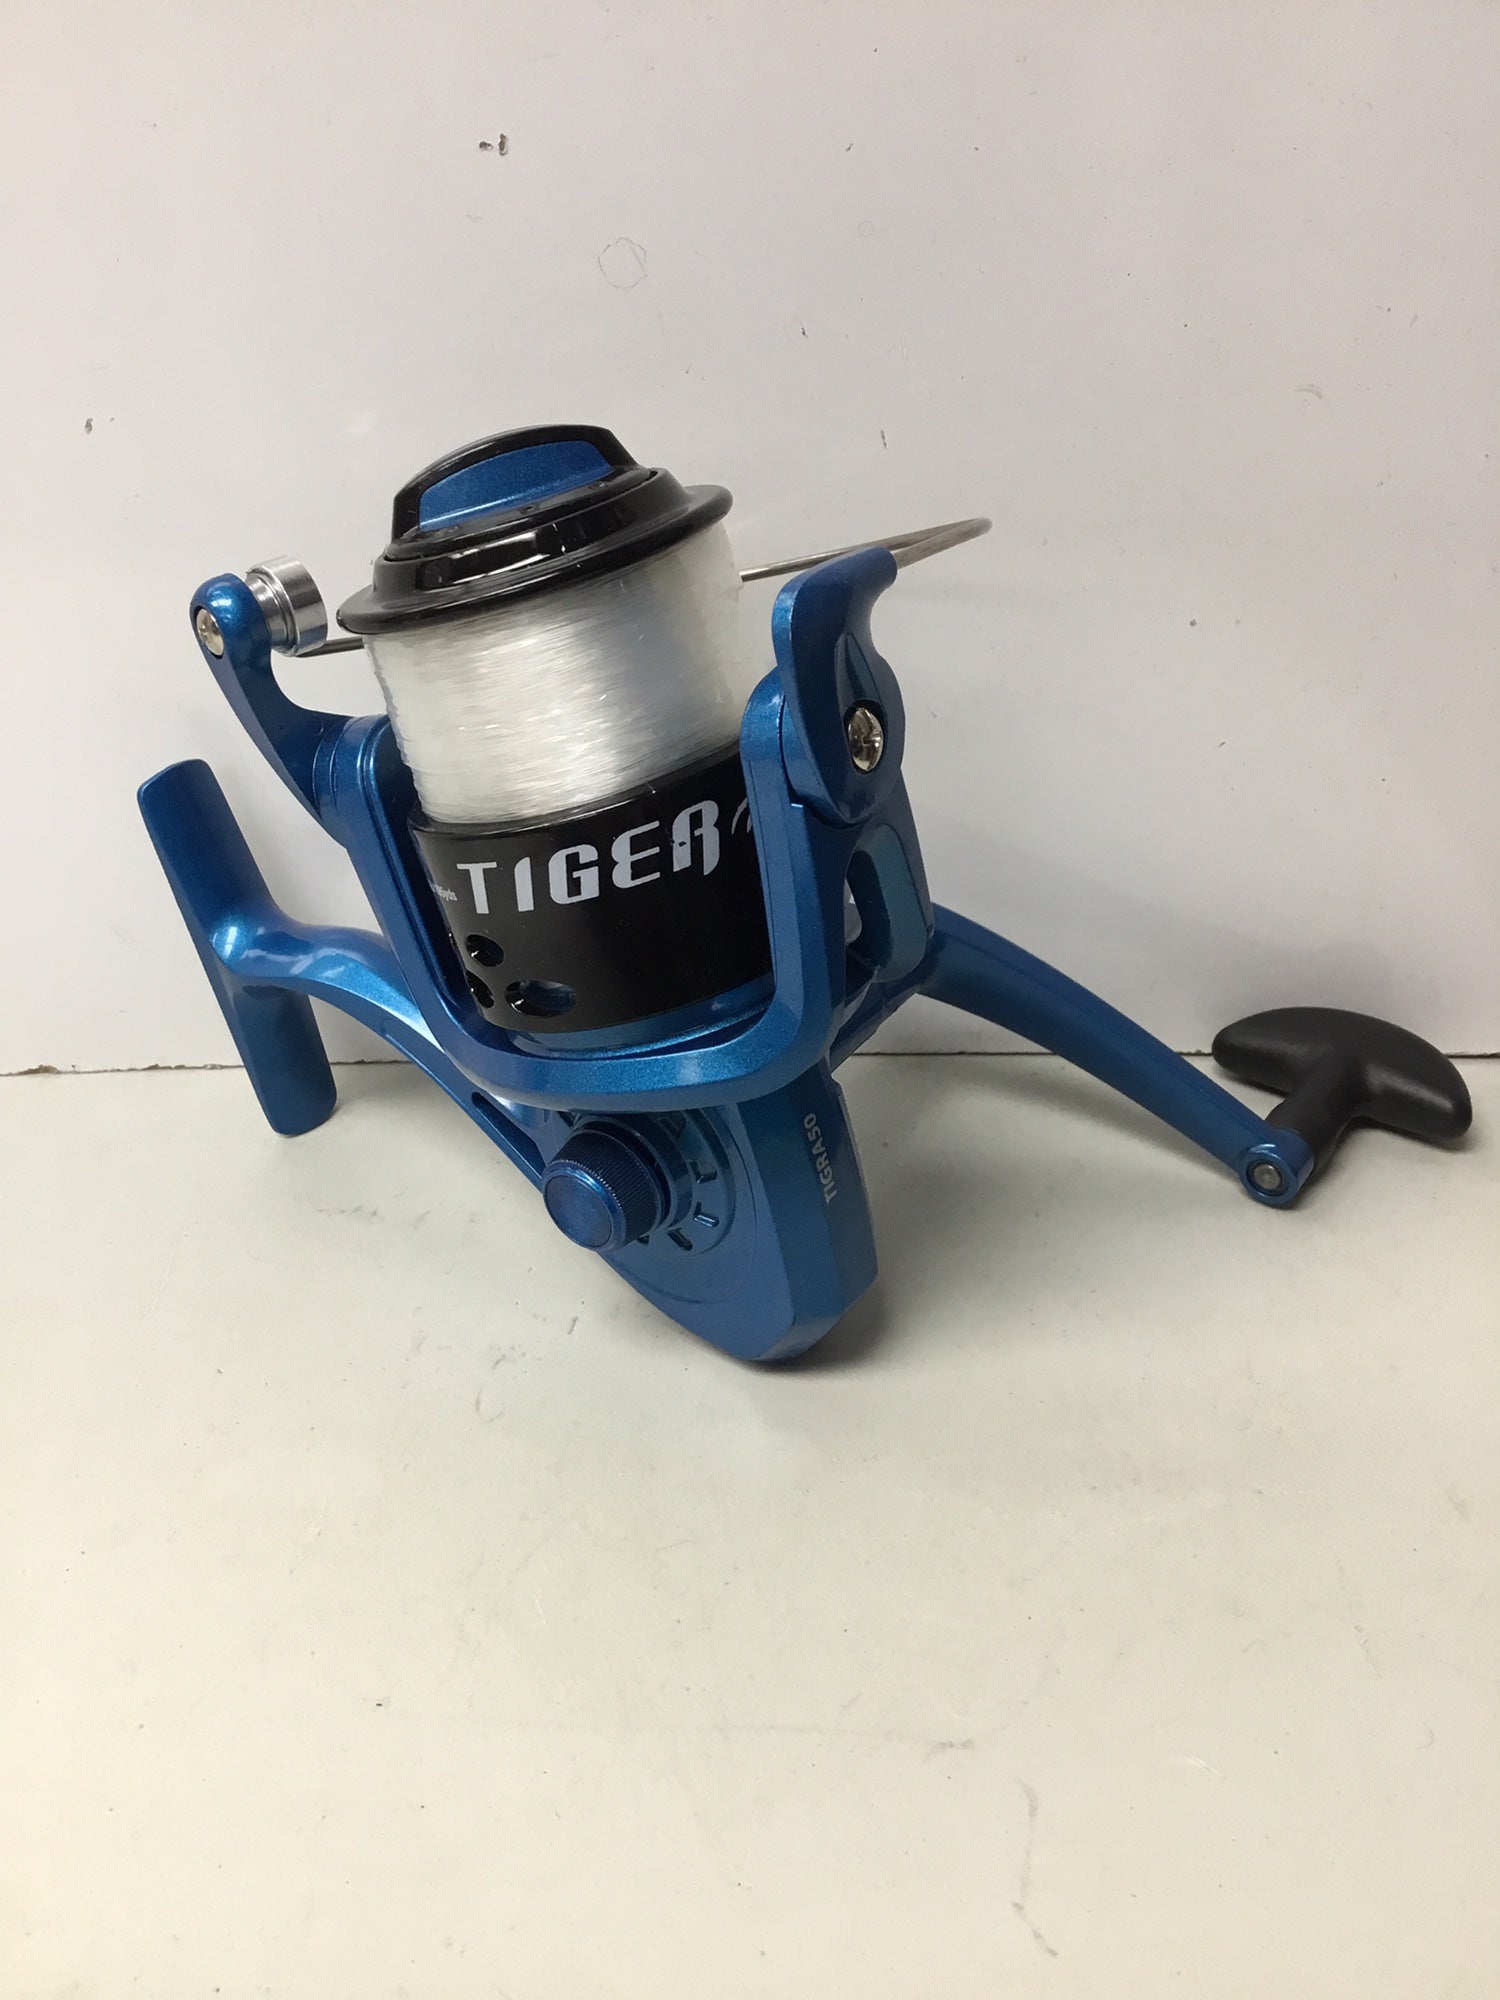 Shakespeare Tiger Fishing Reel, TSP50A Gear Ratio 4.8:1